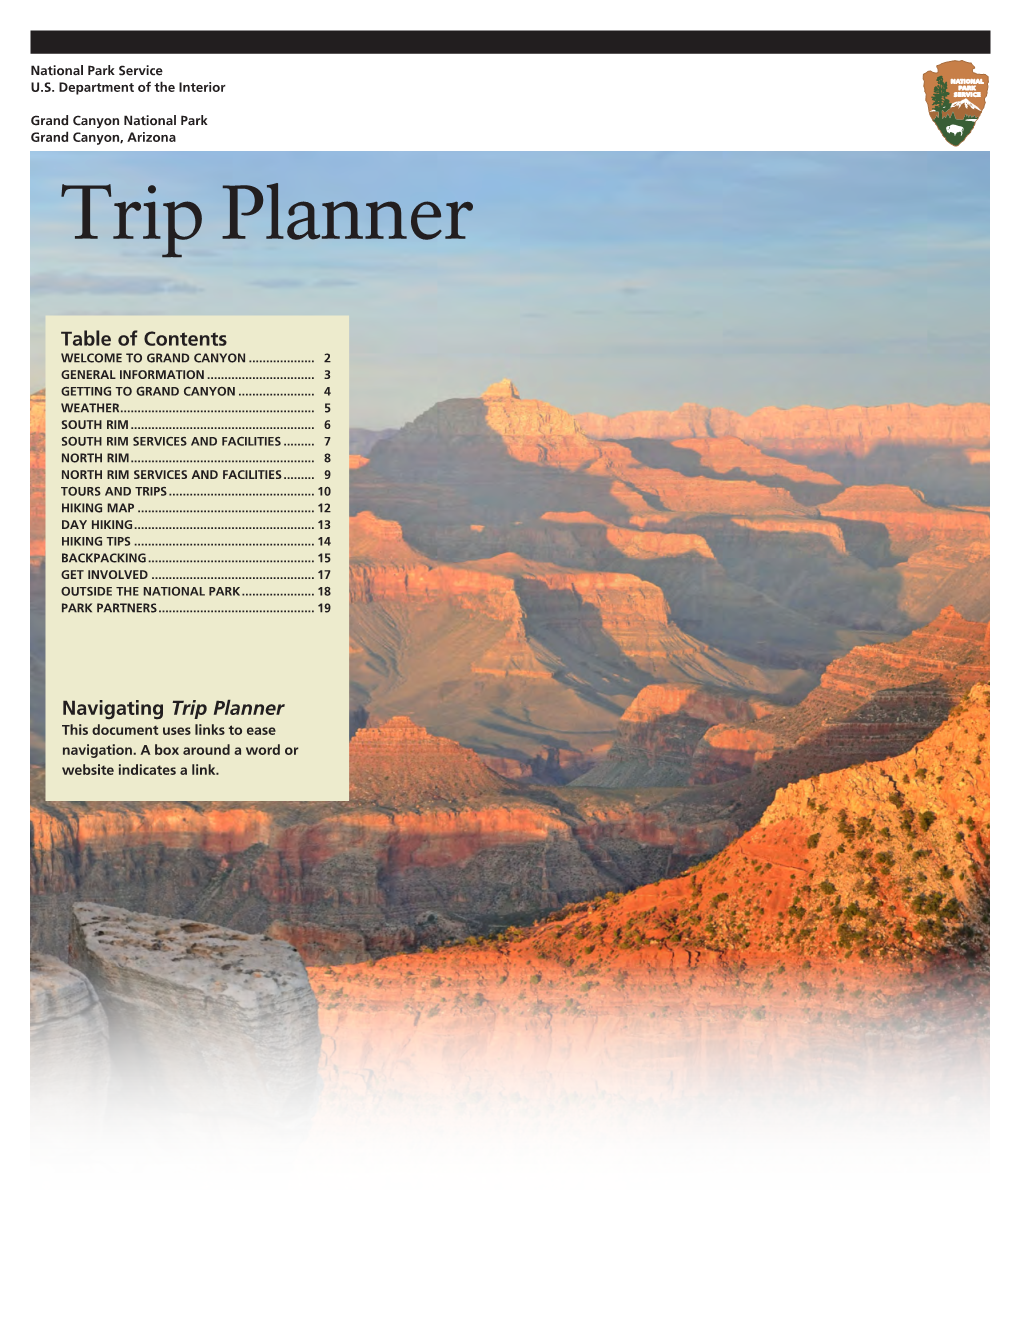 Grand Canyon National Park Trip Planner 2 General Information